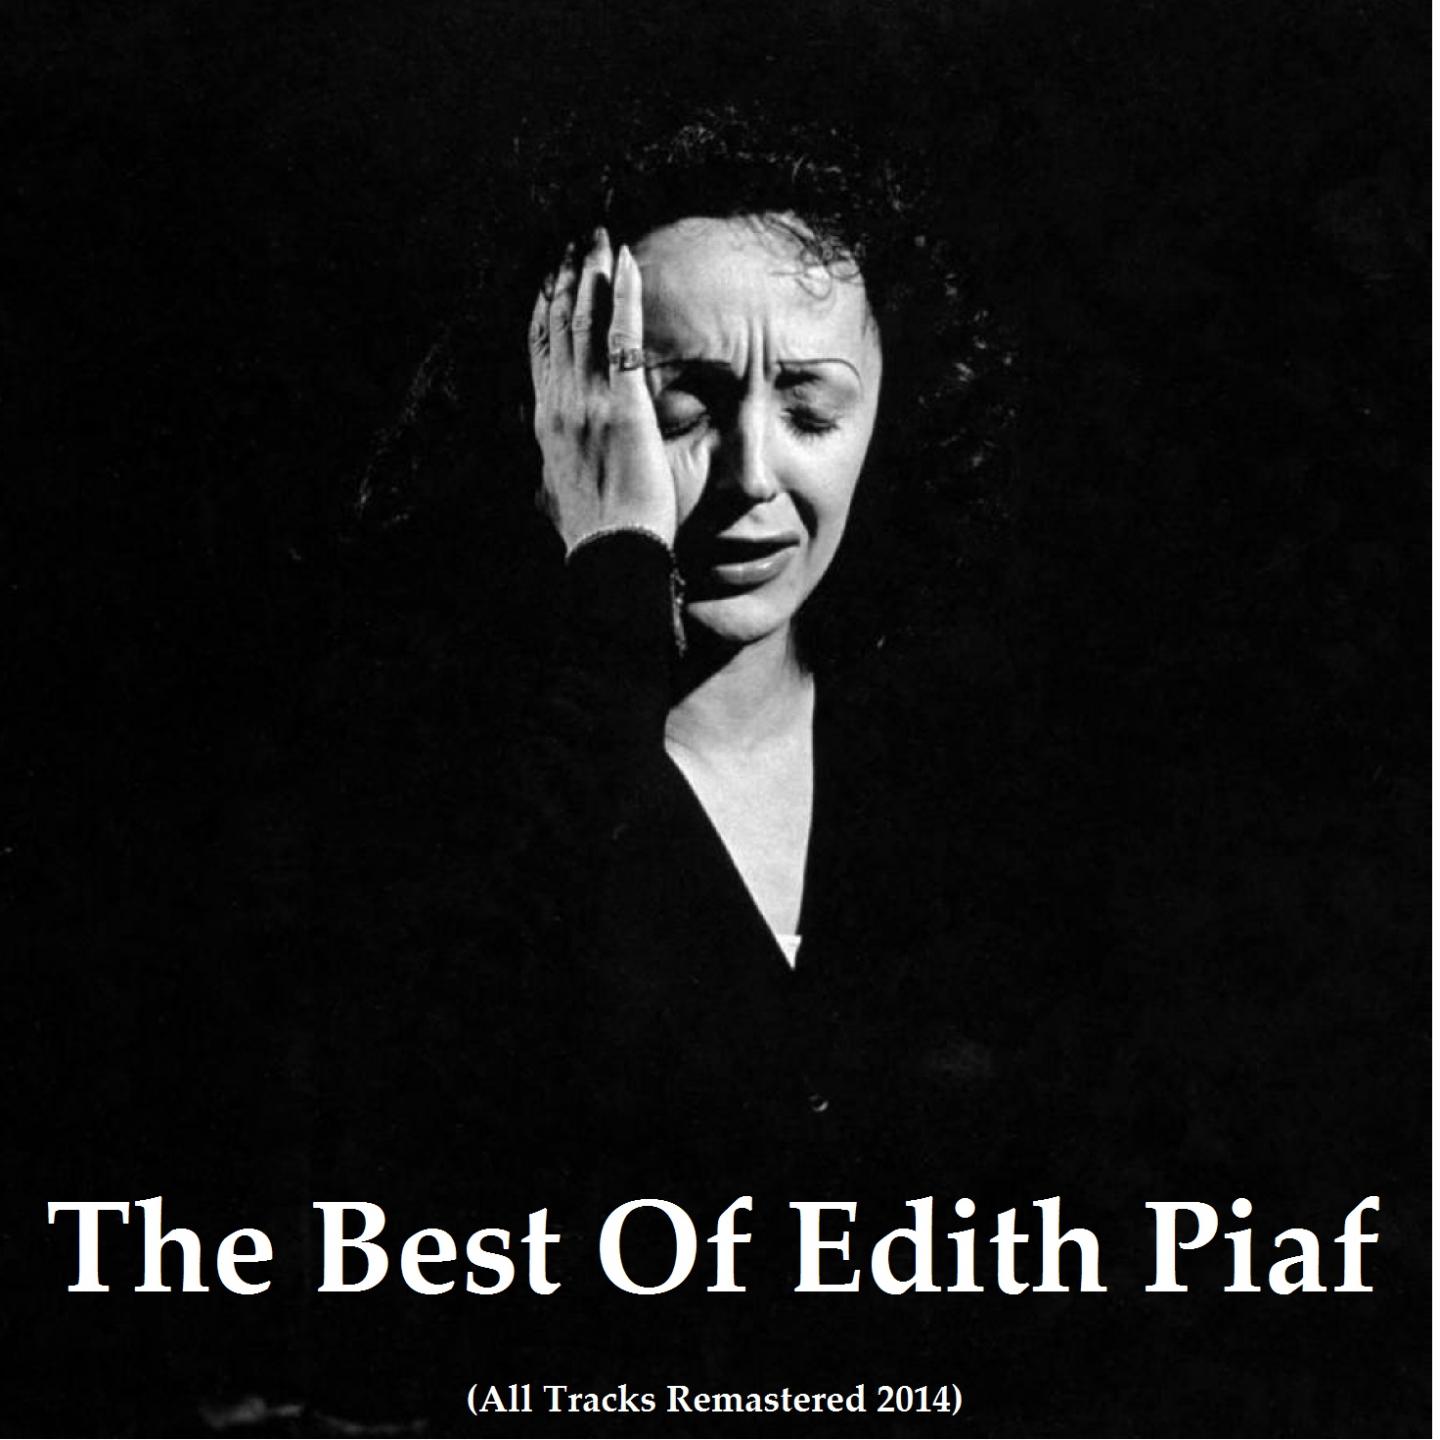 The Best of Edith Piaf (All Tracks Remastered 2014)